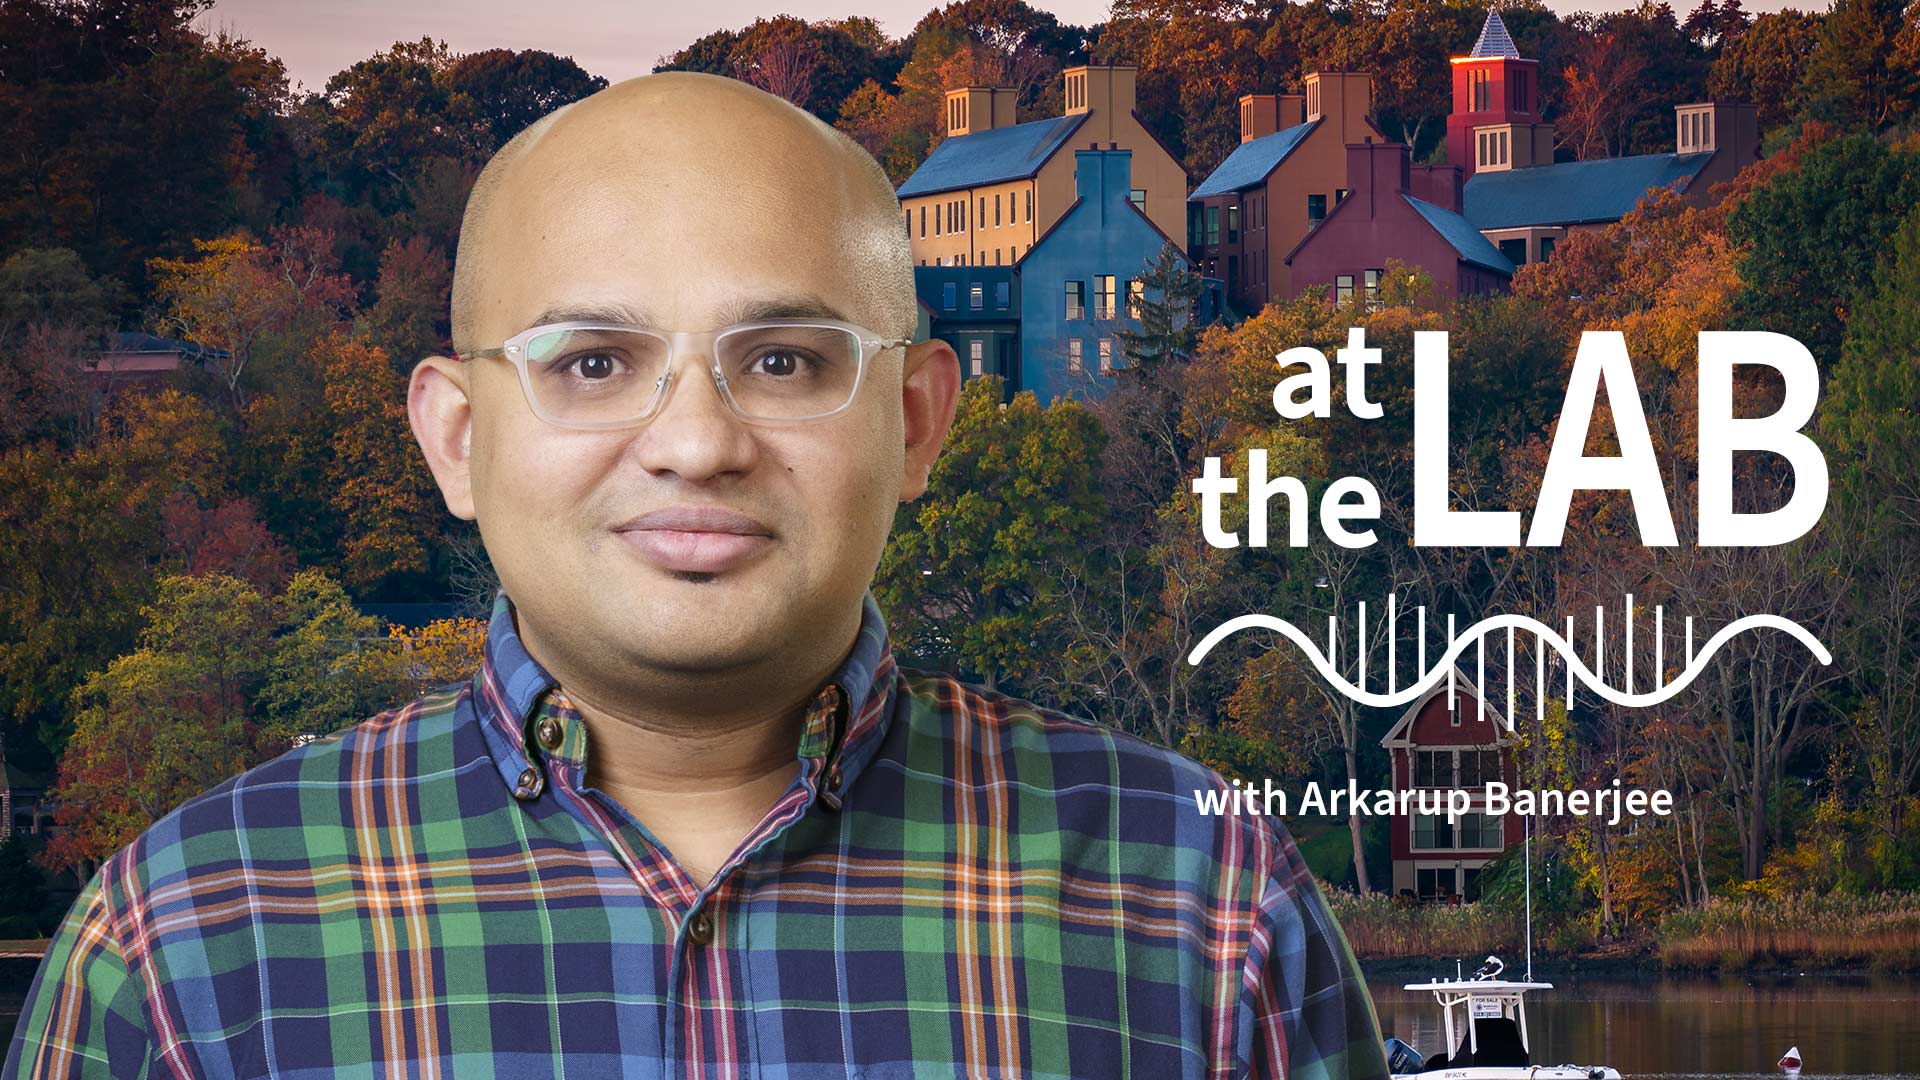 image of Cold Spring Harbor campus from across the harbor with At the Lab podcast logo and portrait of Arkarup Banerjee